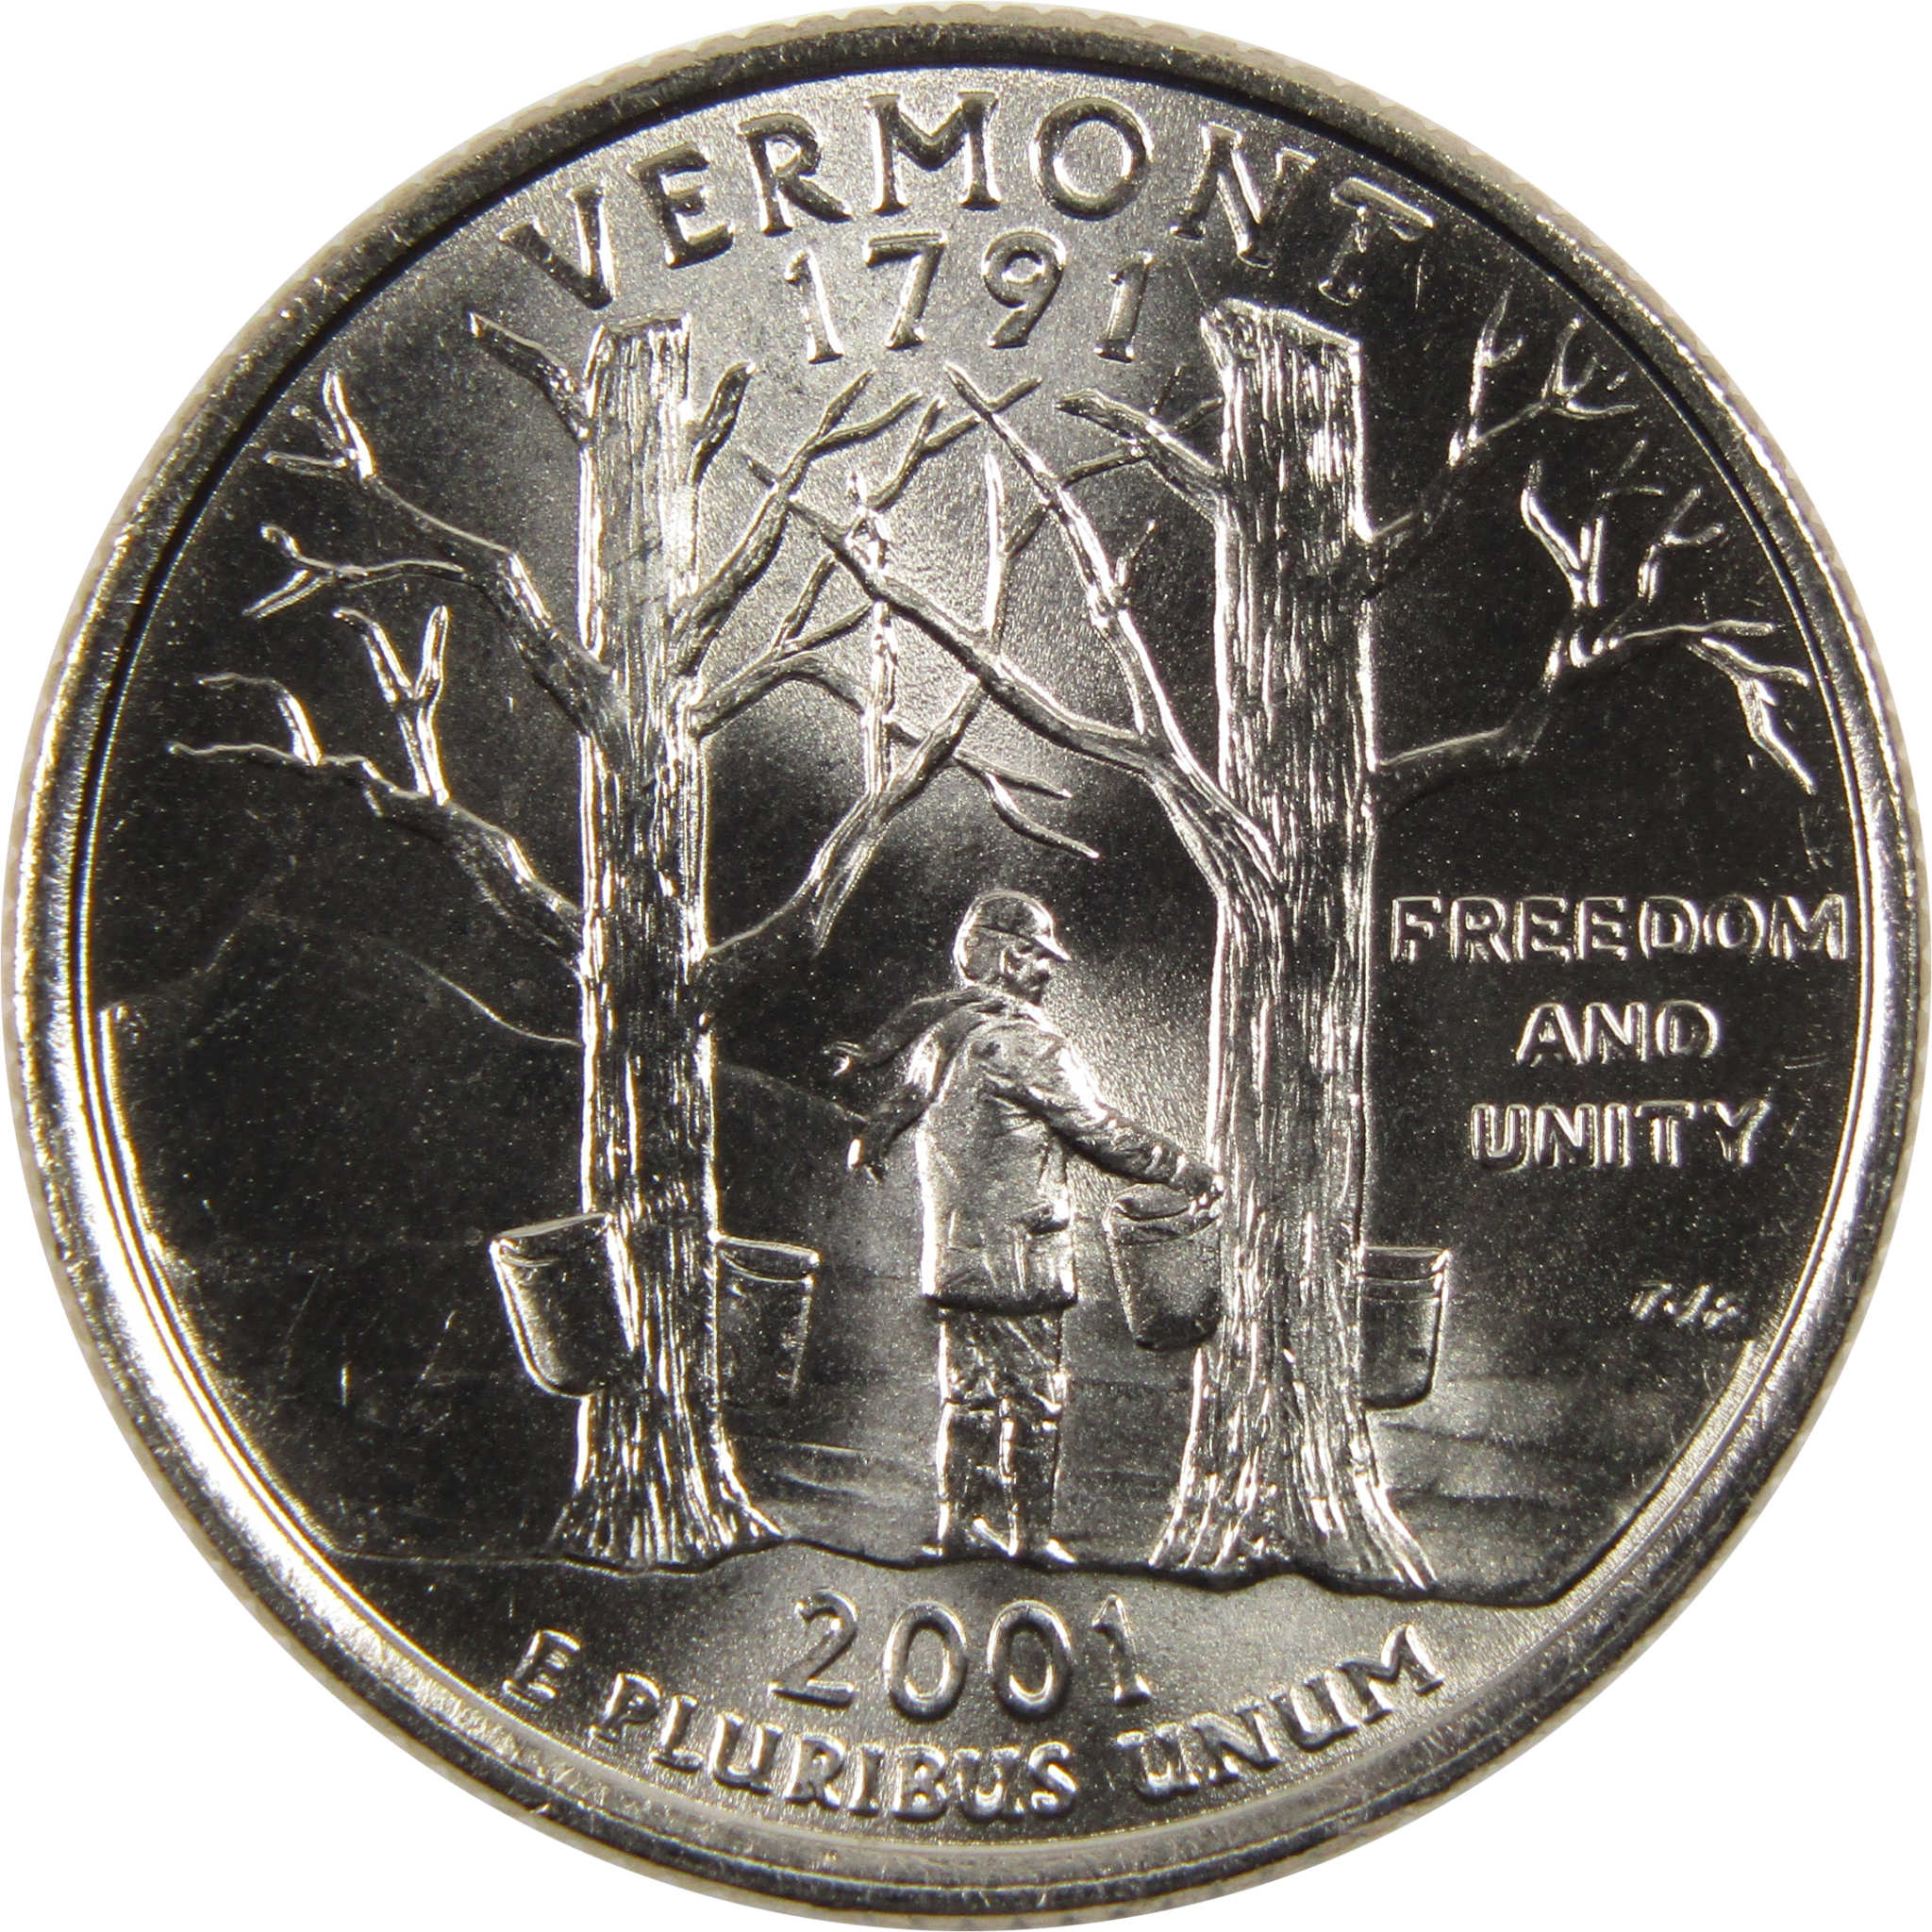 2001 D Vermont State Quarter BU Uncirculated Clad 25c Coin